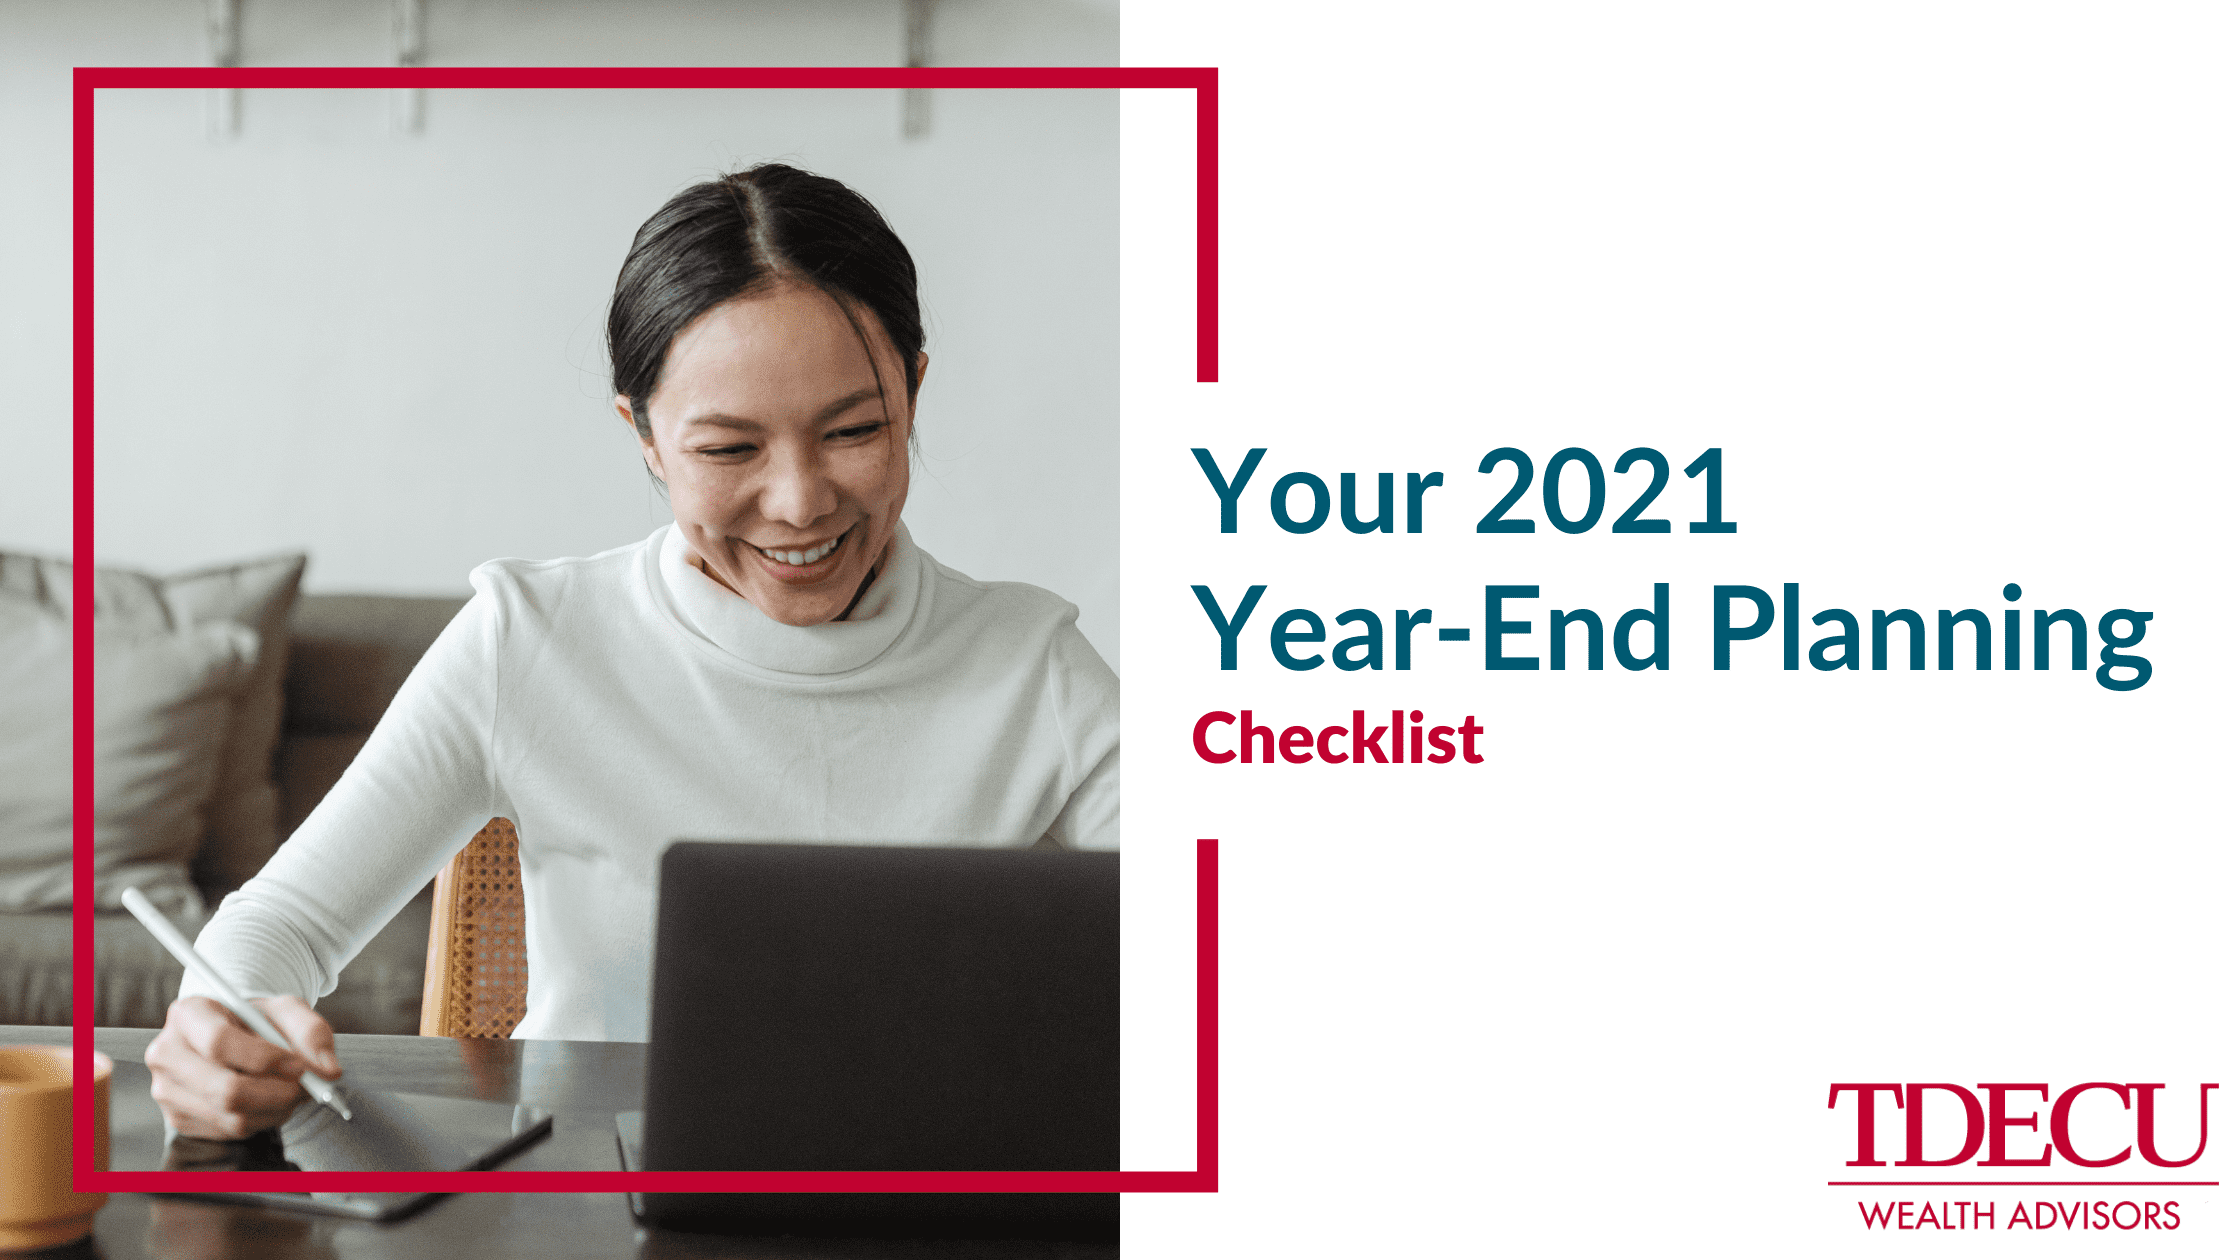 Your 2021 Year-End Planning Checklist